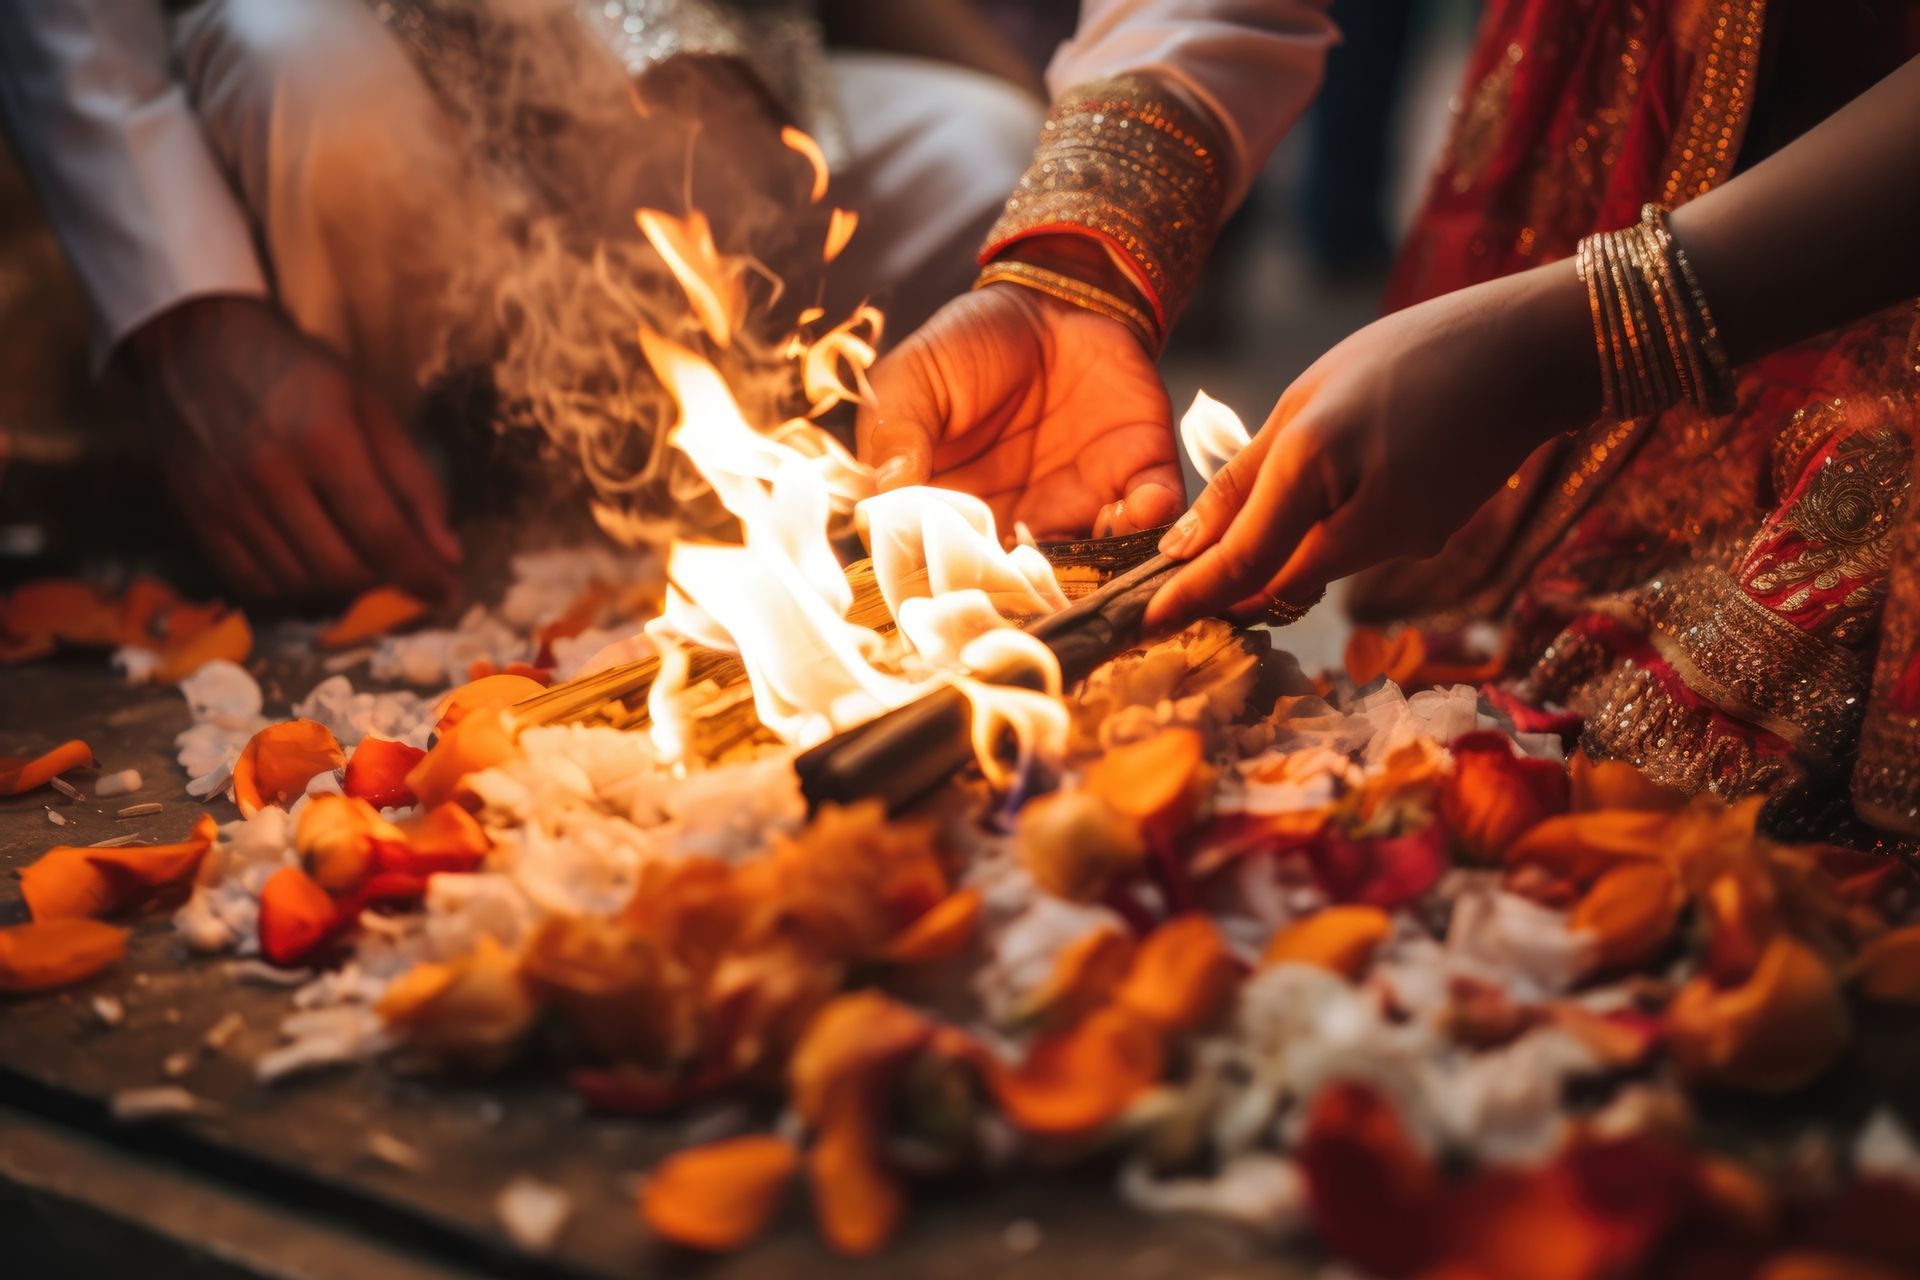 wedding venues accommodating fire rituals  